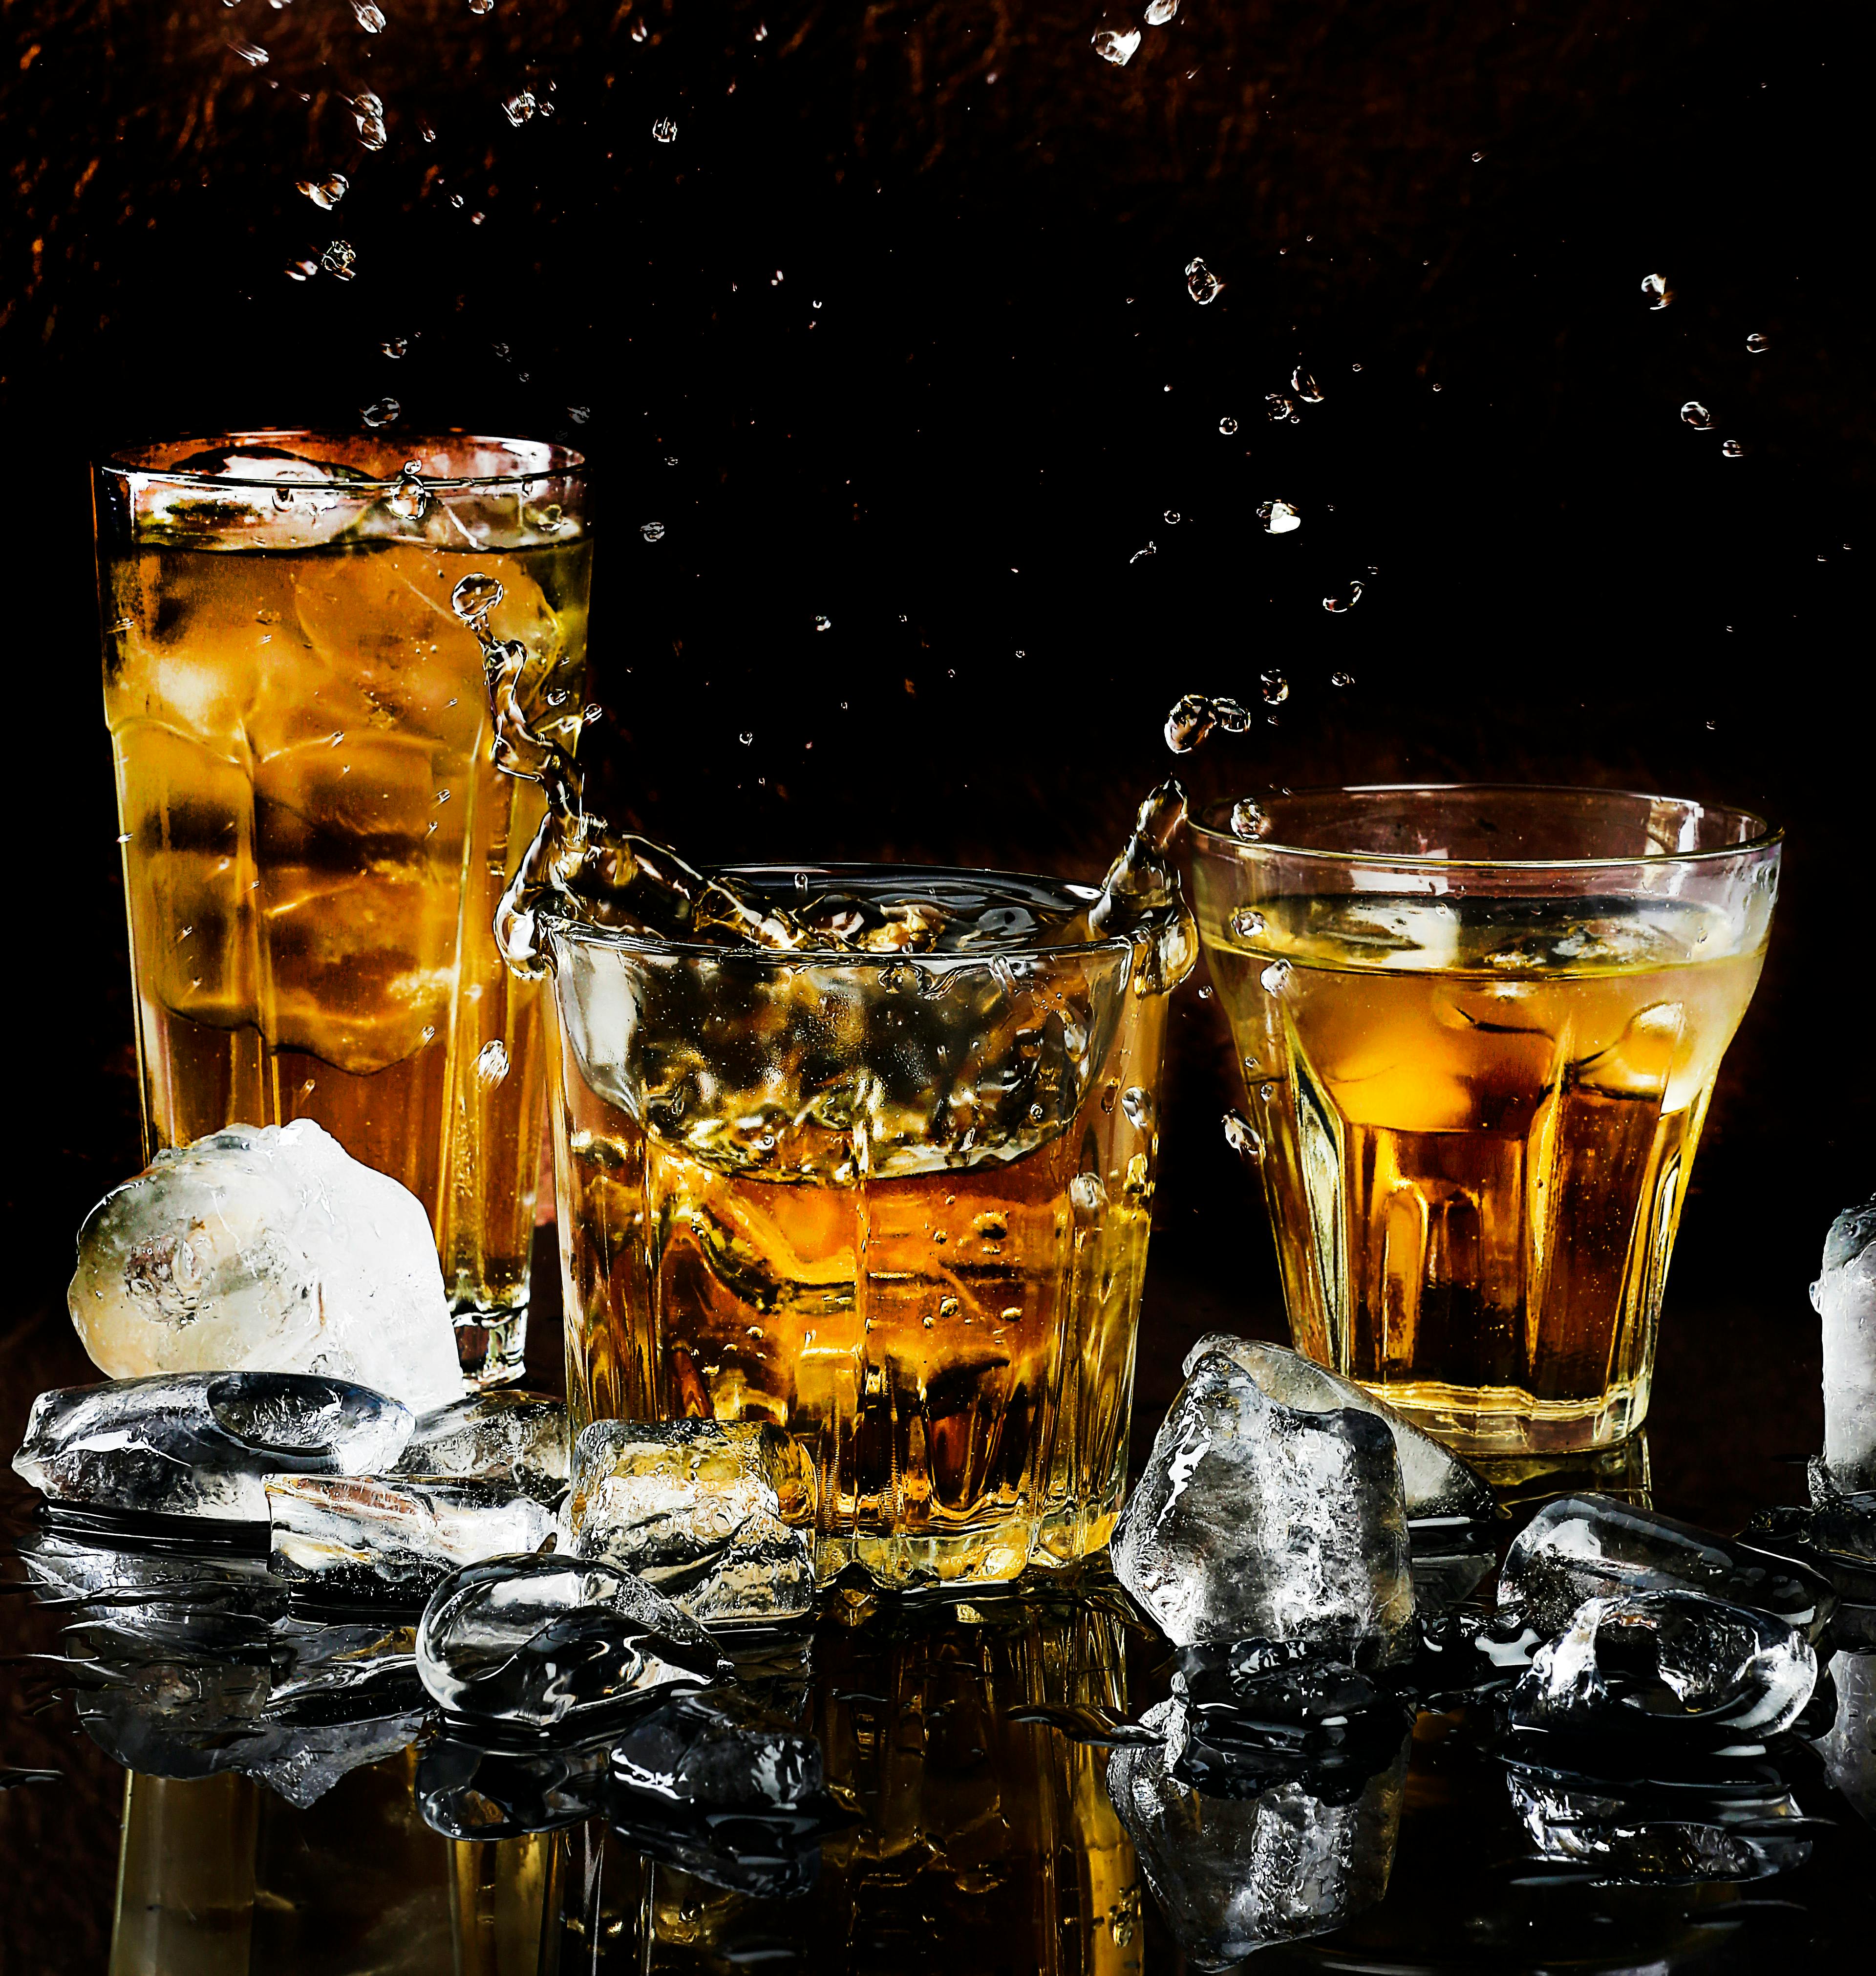 The single malt is most traditionally served on the rocks so you can enjoy the flavours and aromas that ooze out of the liquor when it is swirled in a classic rocks glass.